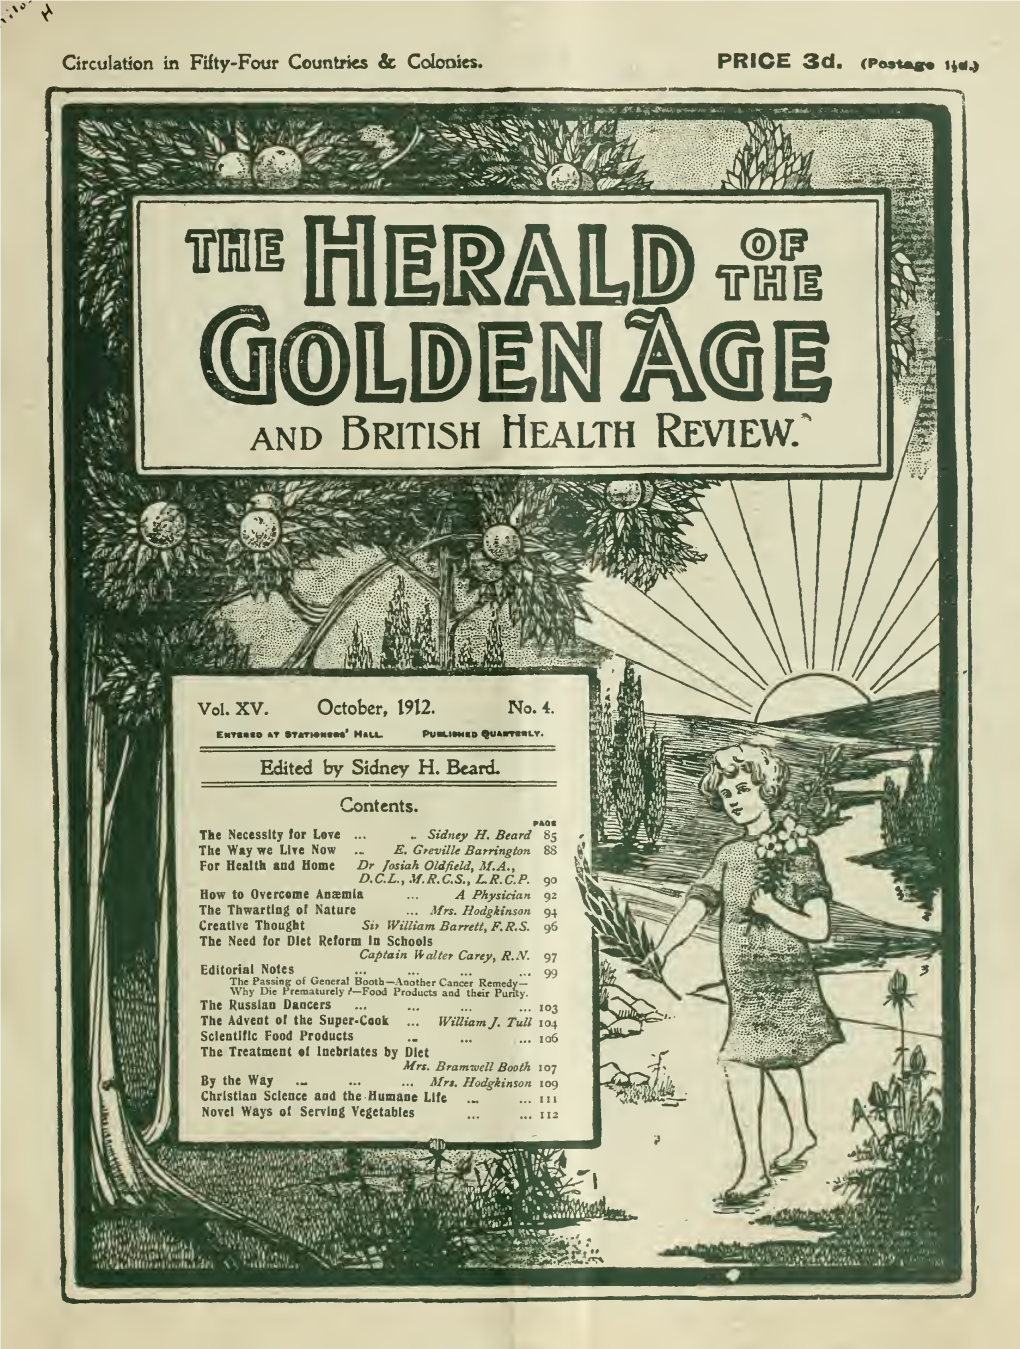 Herald of the Golden Age." •••••••••••••••••••••••••••••••••••••••A Formerly Known I I ARCHEVA ( EHIL PAILV's RUSKS